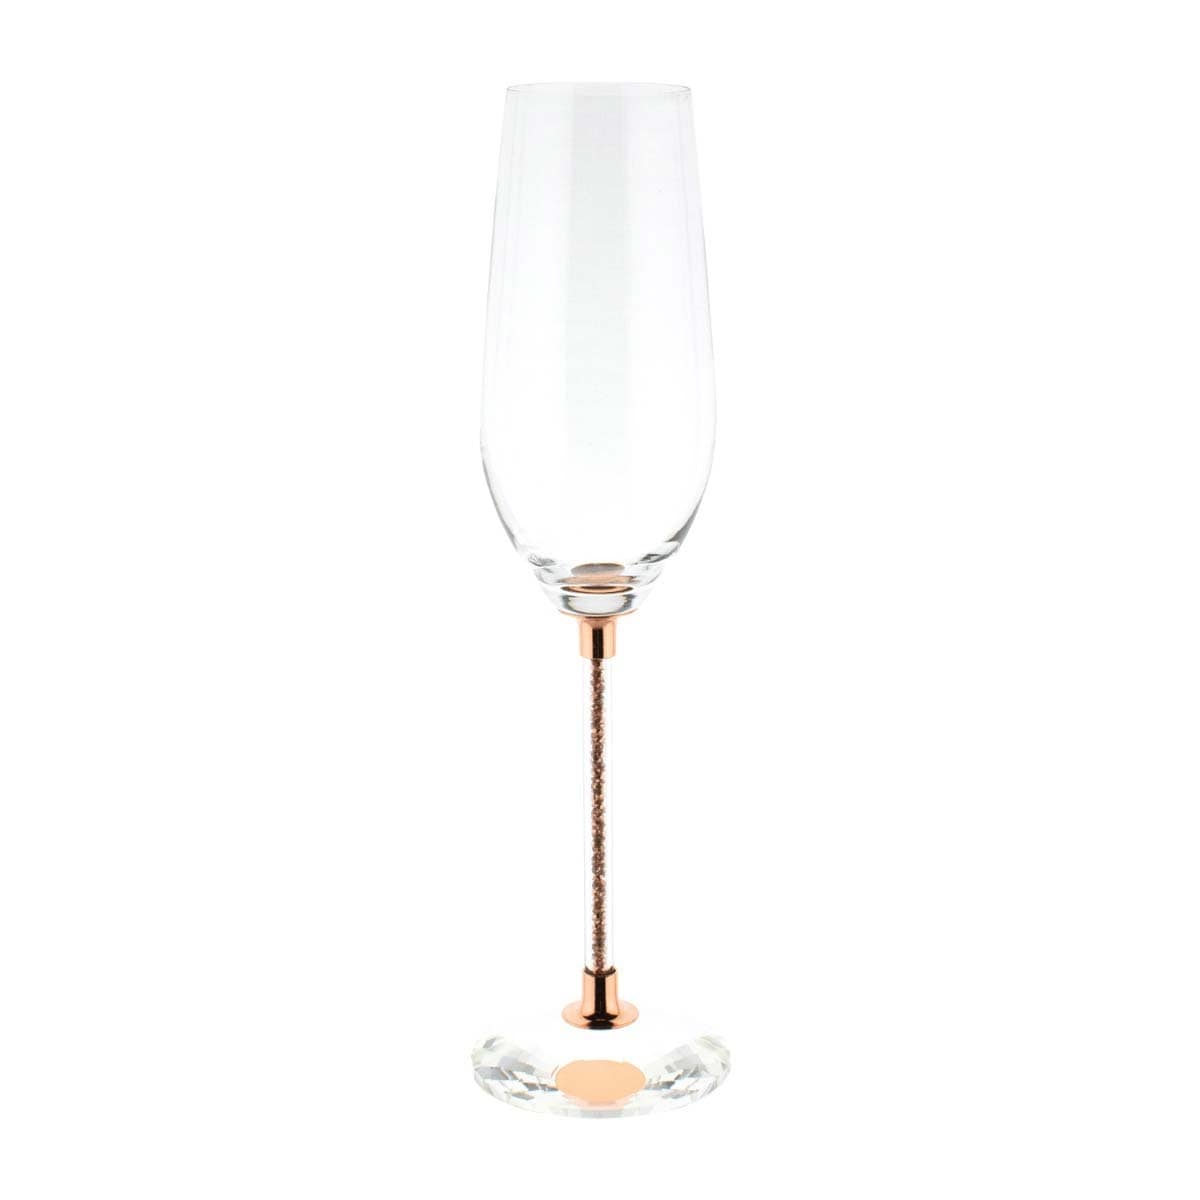 https://ak1.ostkcdn.com/images/products/is/images/direct/4e9dda03fe9393339ea2fe6717ab2d2a578e2e2a/Sparkles-Home-Rhinestone-Crystal-Filled-Stem-Toasting-Flutes.jpg